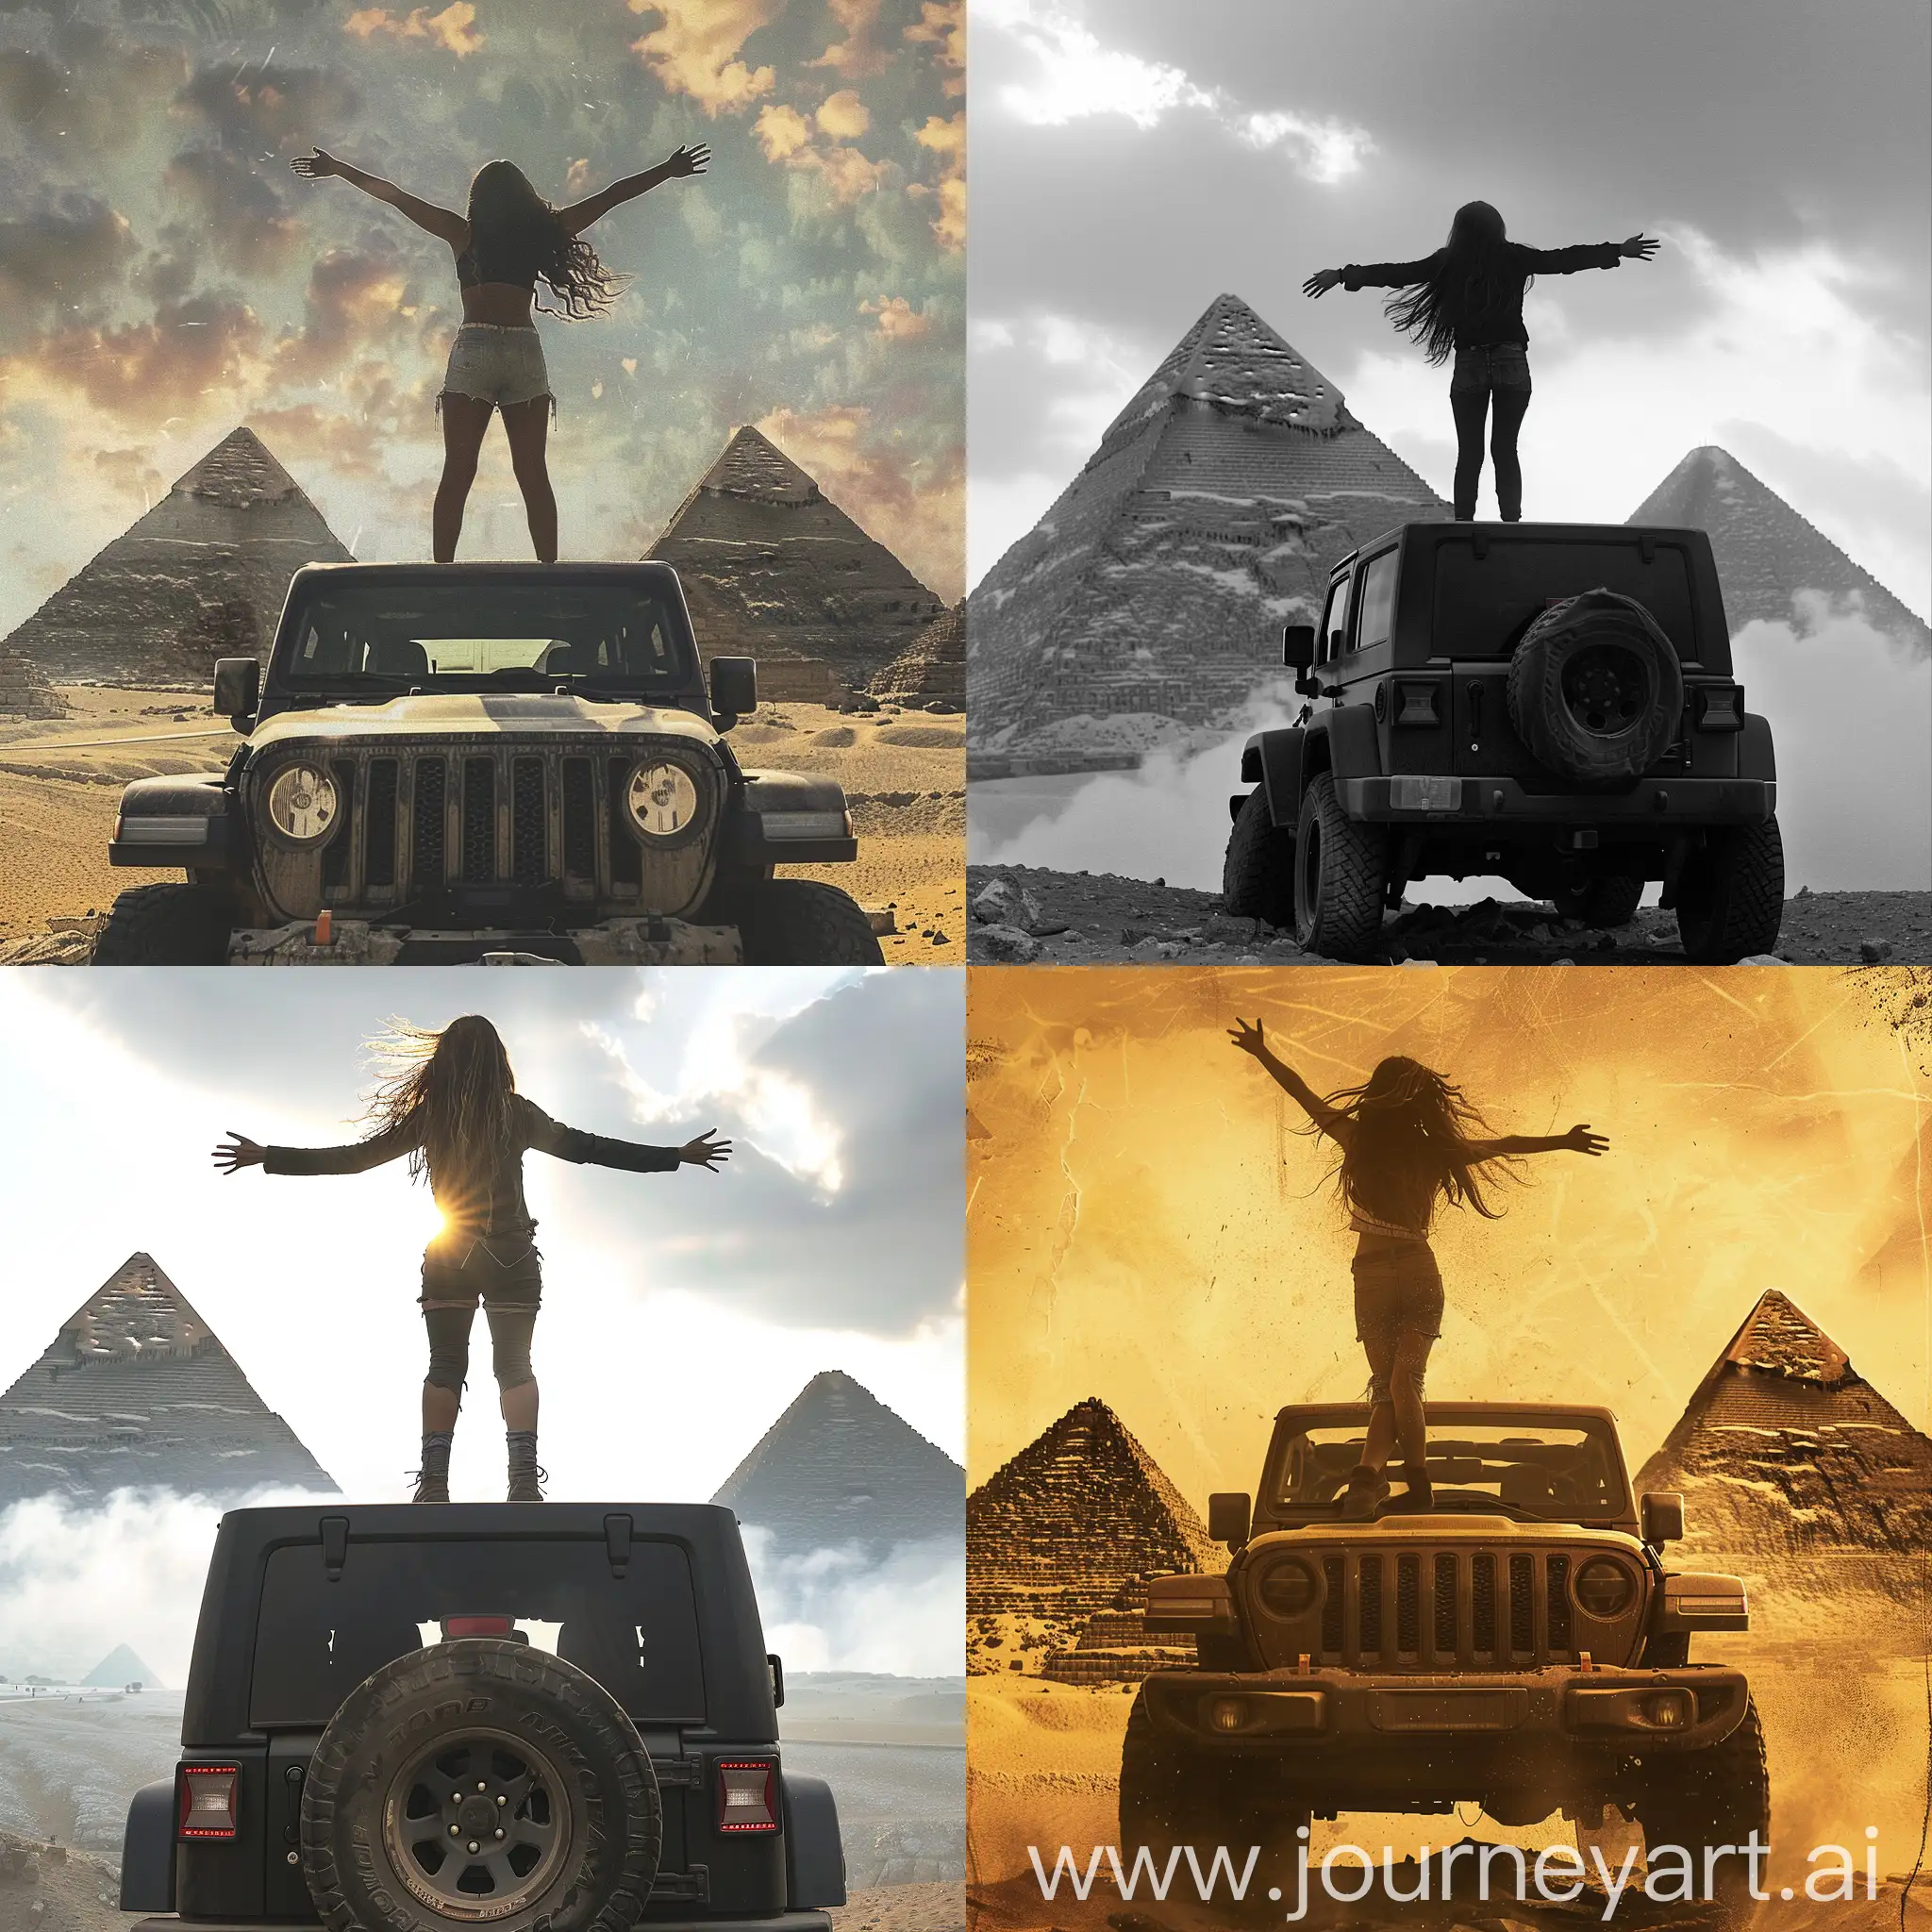 Girl-with-Outstretched-Arms-atop-Jeep-with-Pyramid-Backdrop